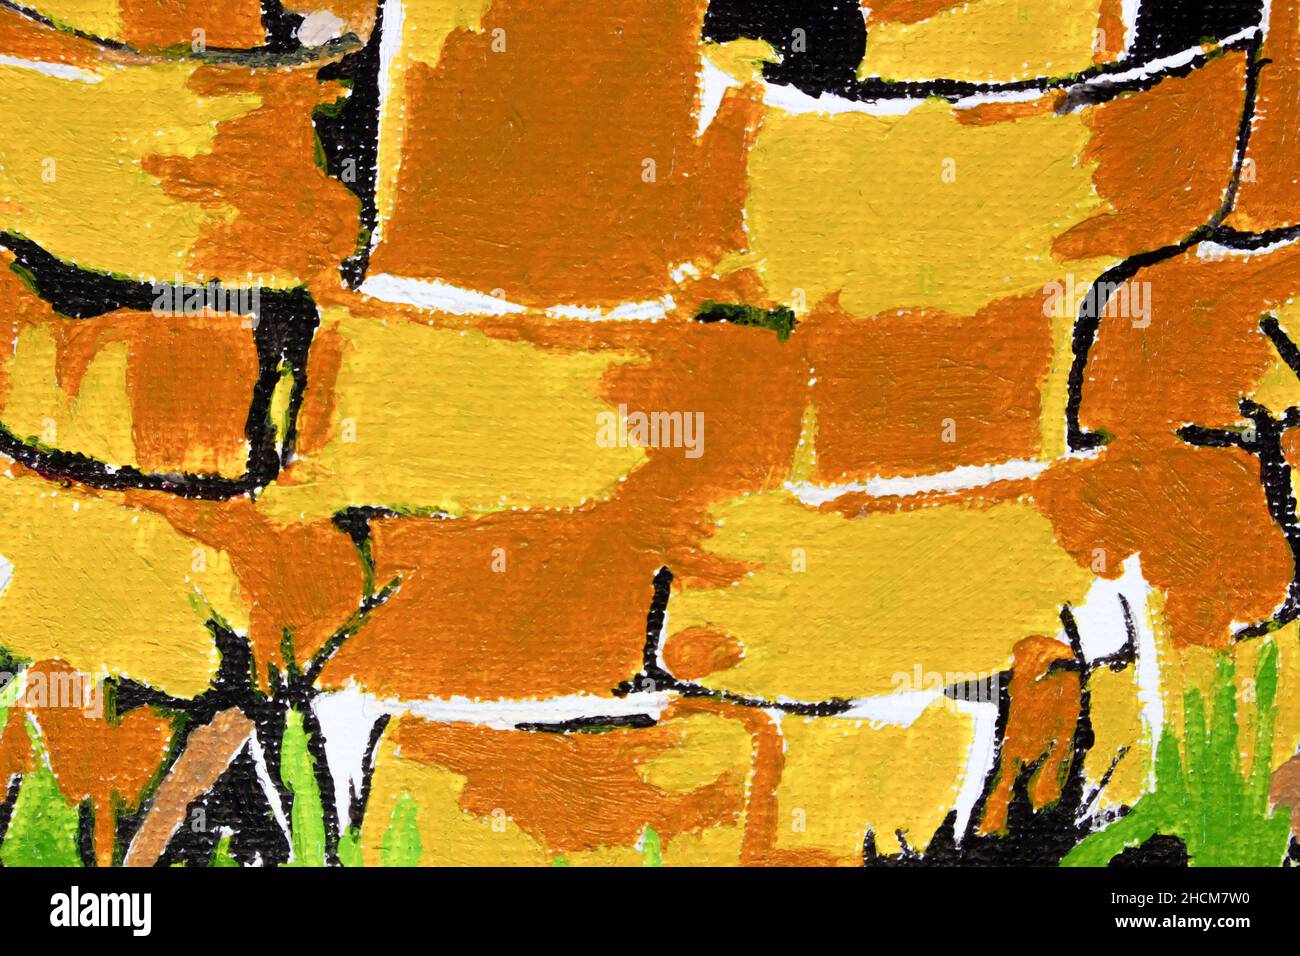 Oil painting on canvas, abstraction of yellow and orange spots. Fragment of abstract painting Stock Photo